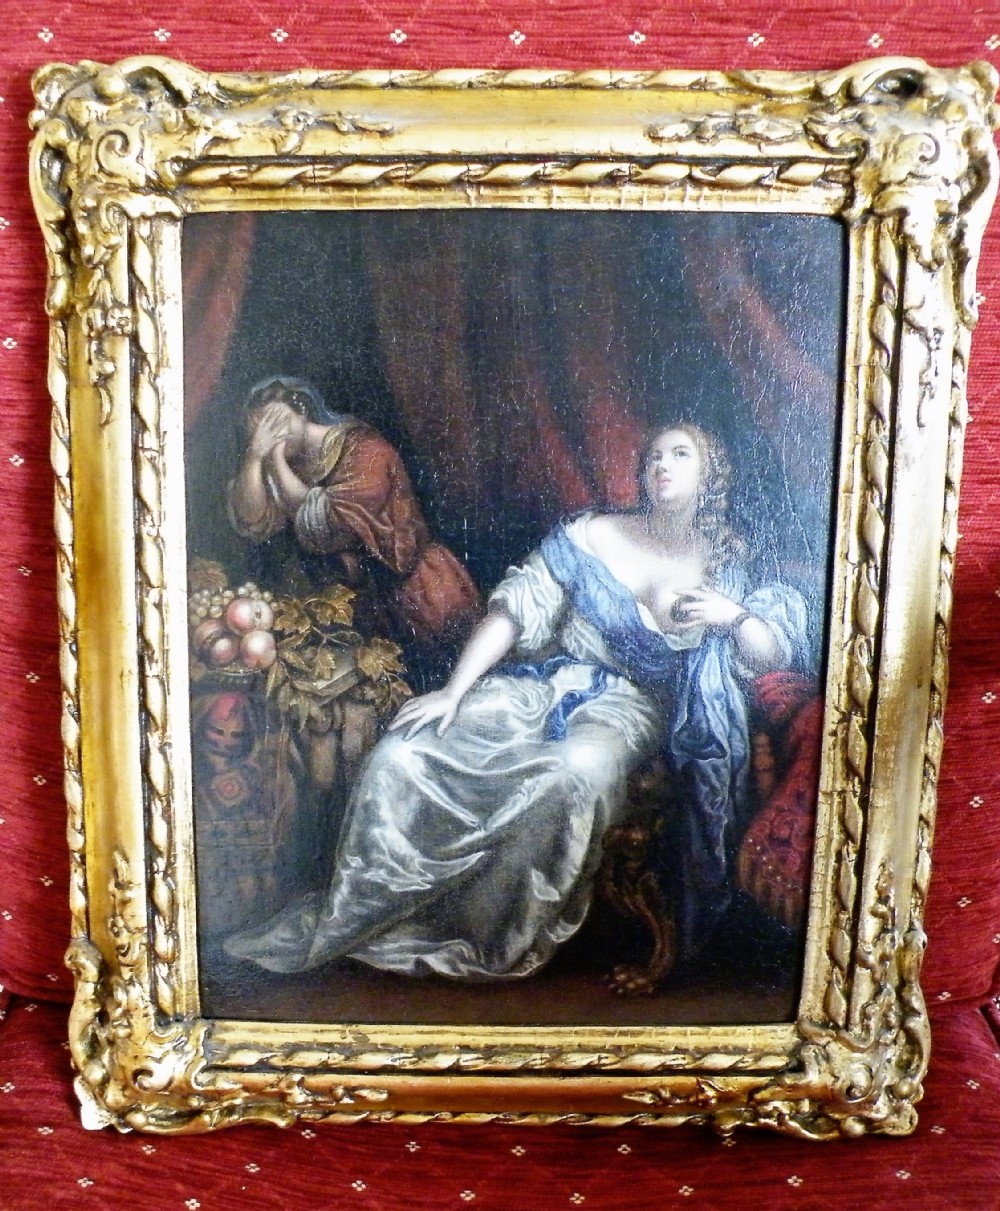 cleopatra and the asp oil painting on oak panel early 18th century german school